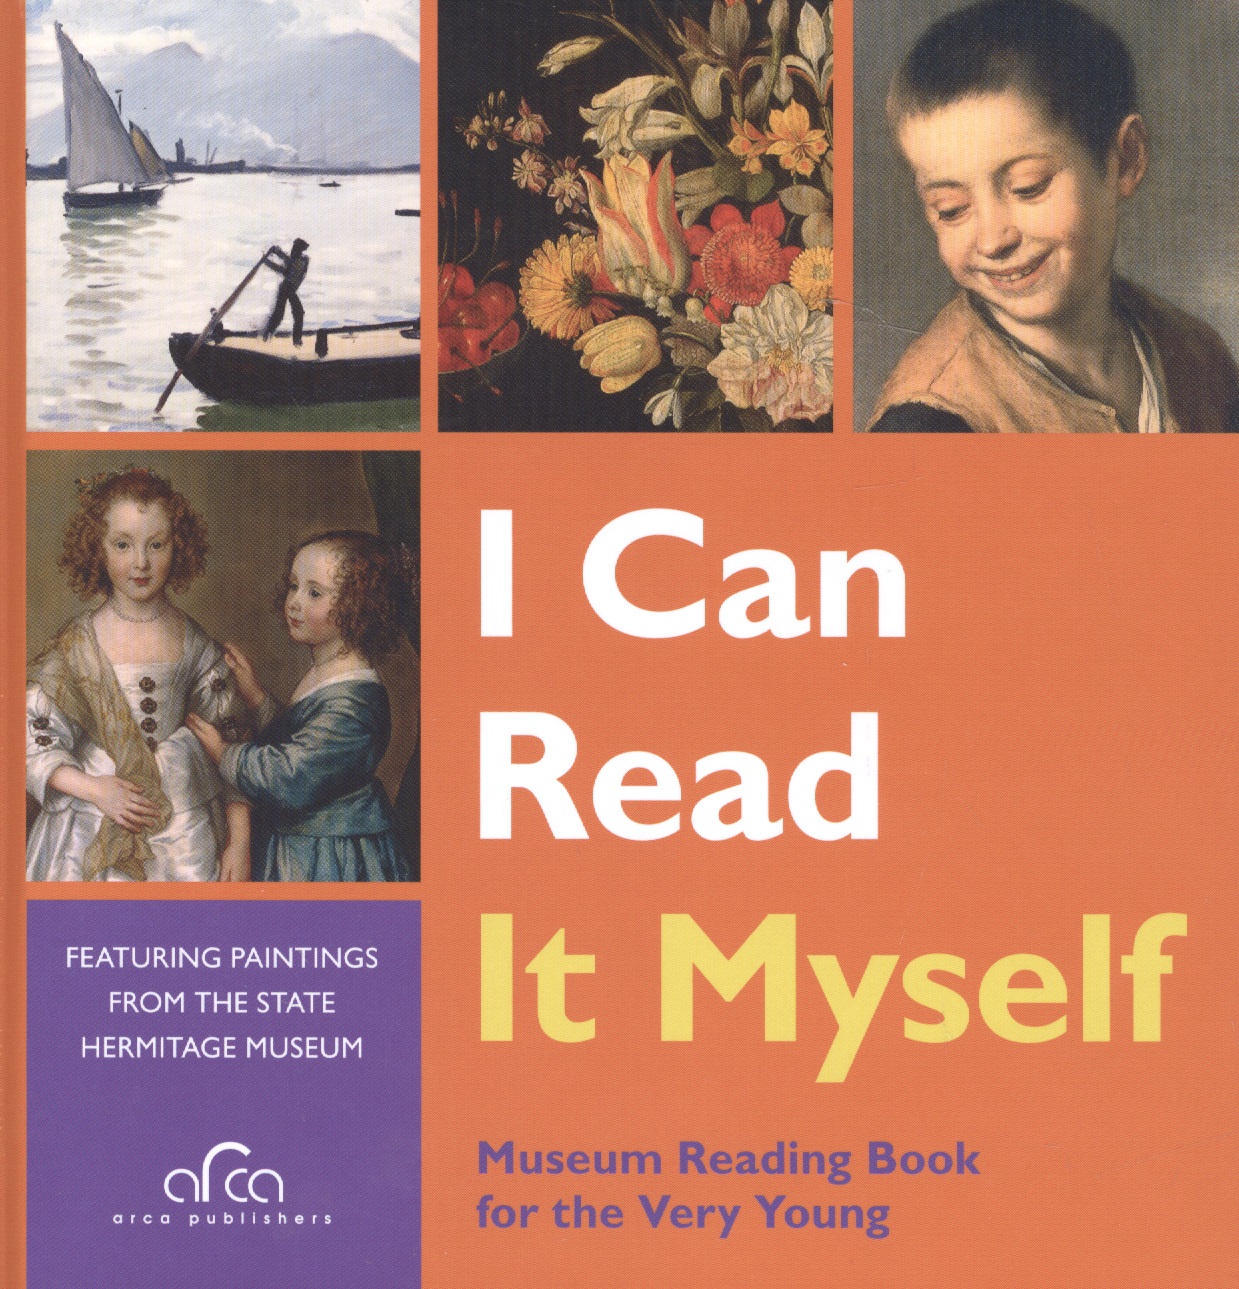 Стрельцова Елена М. - I can read if myself. Featuring paintings from the State Hermitage museum